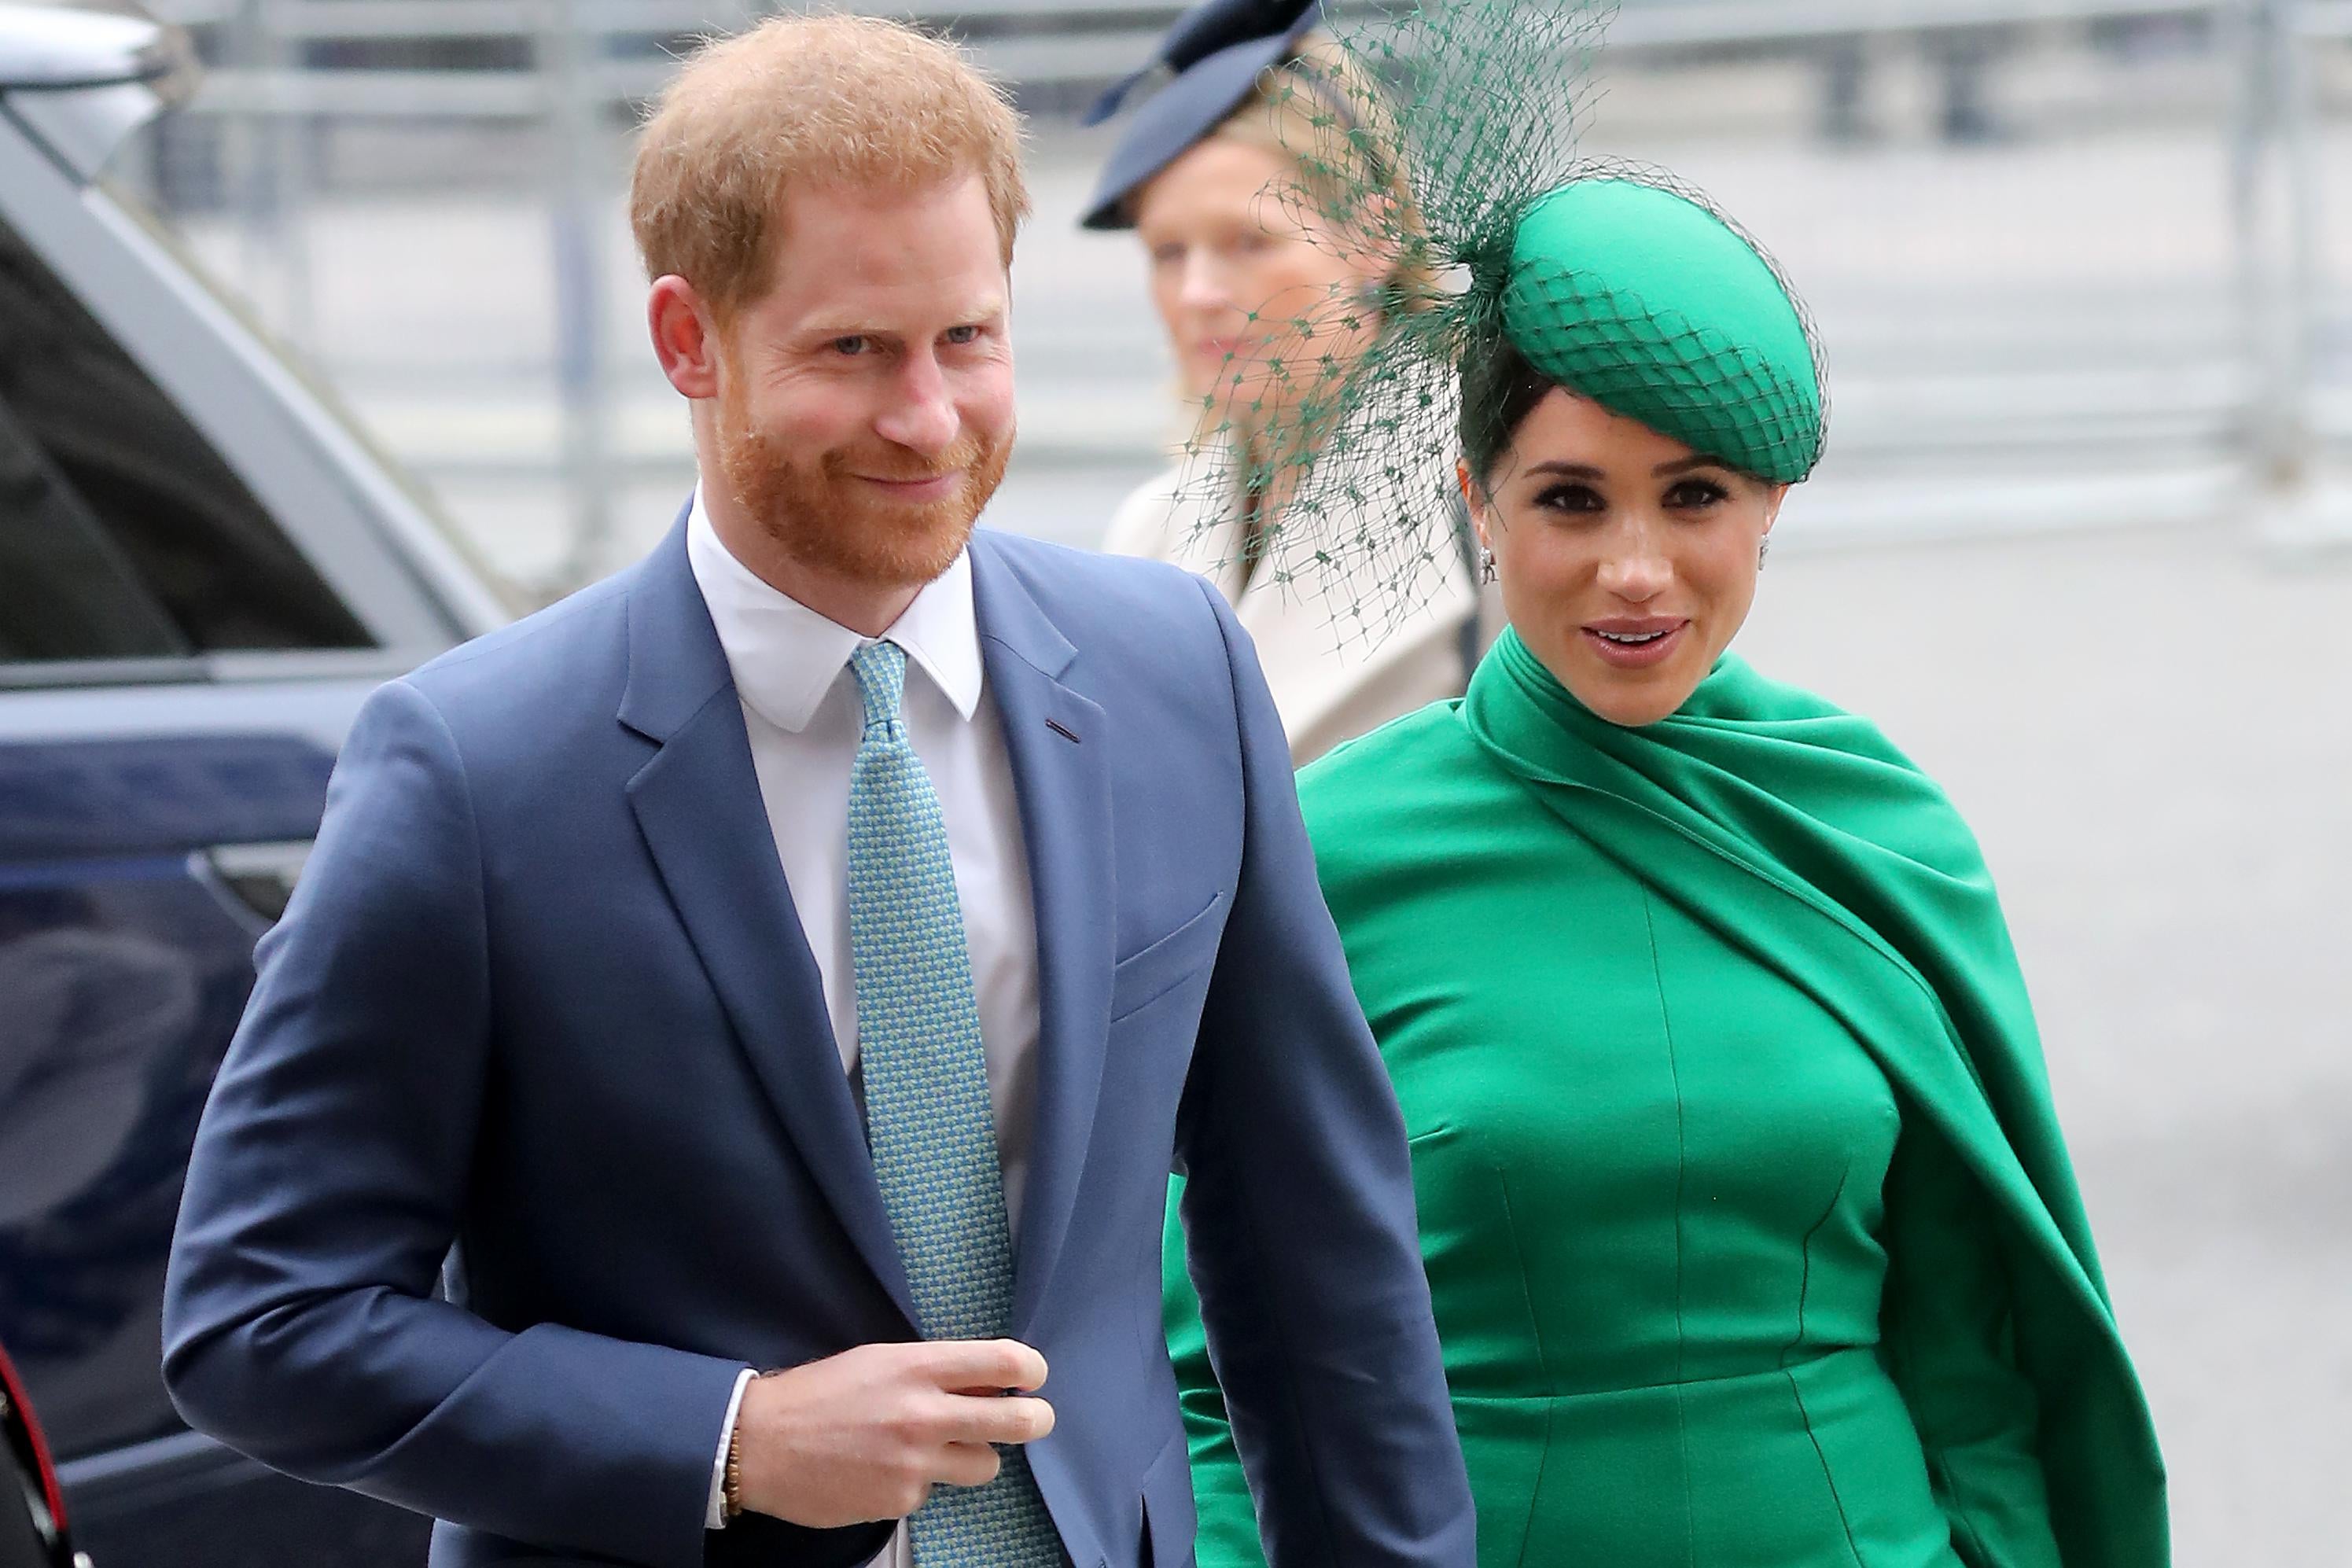 Prince Harry wearing a suit standing next to Meghan Markle in a green outfit with cape and green hat, seen from the waist up, in London.